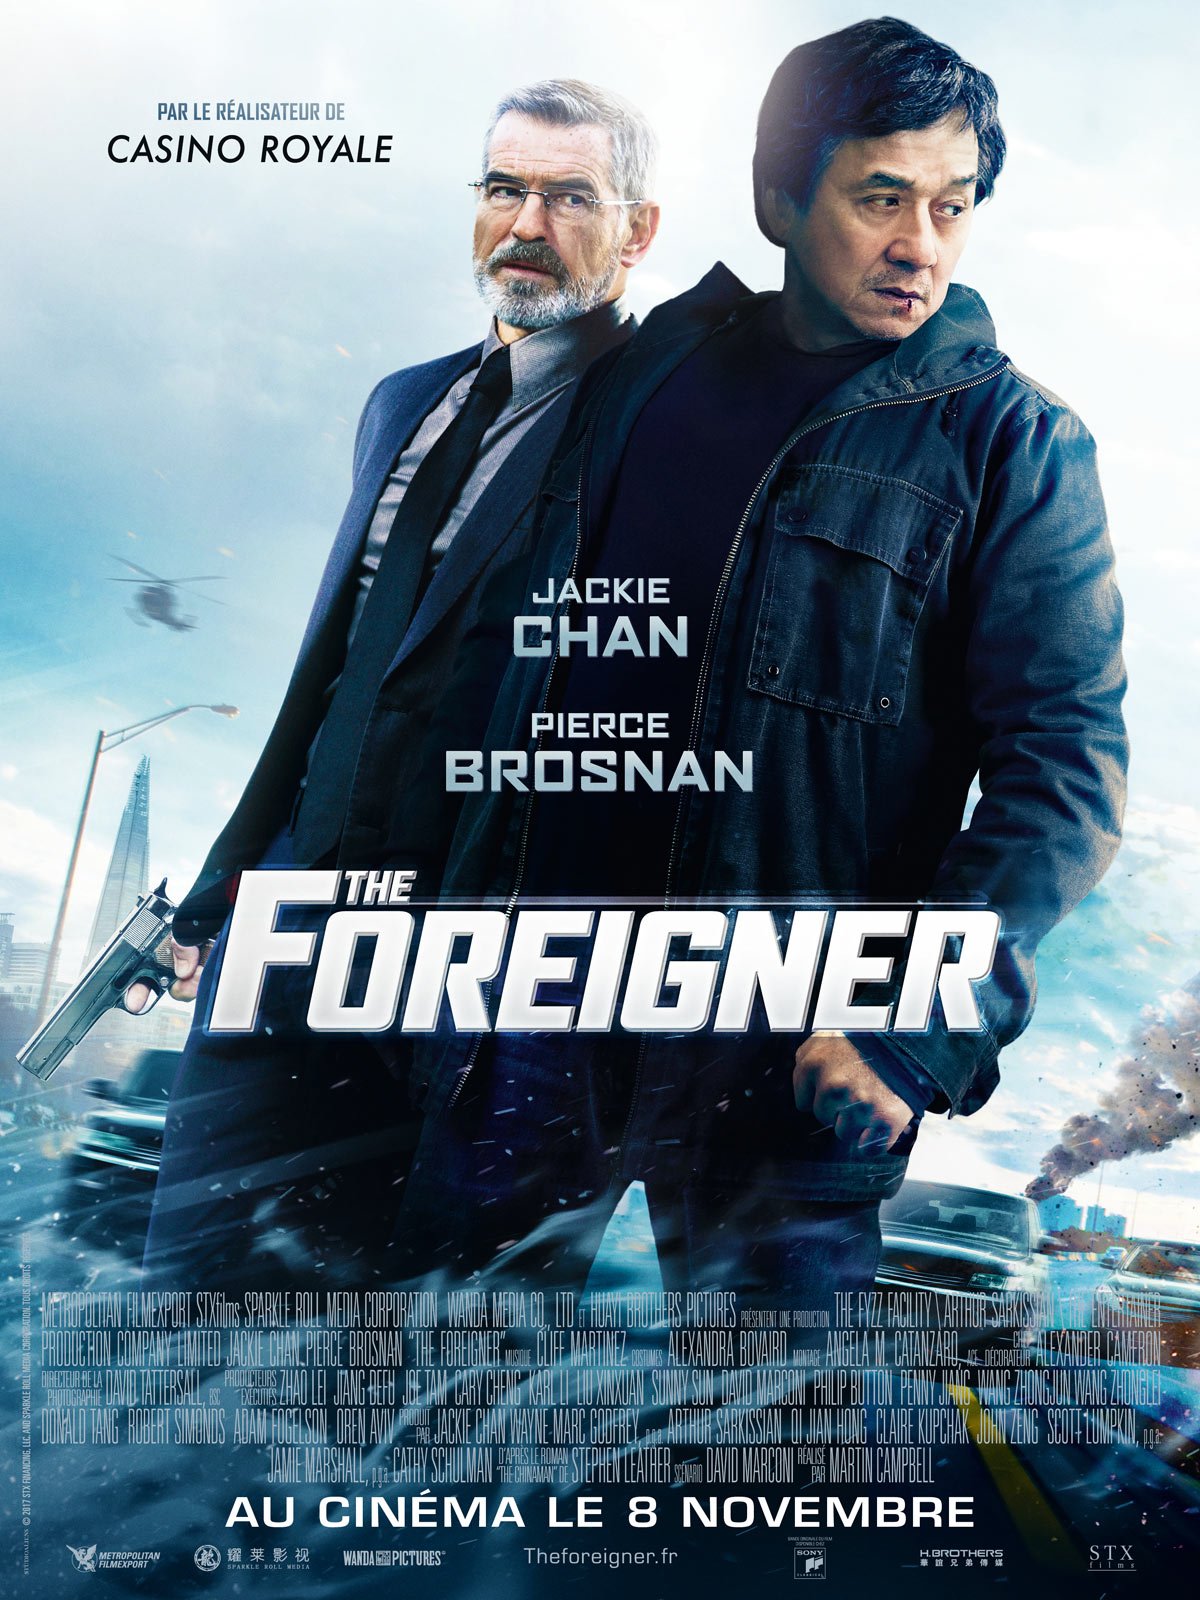 The Foreigner streaming vf gratuit